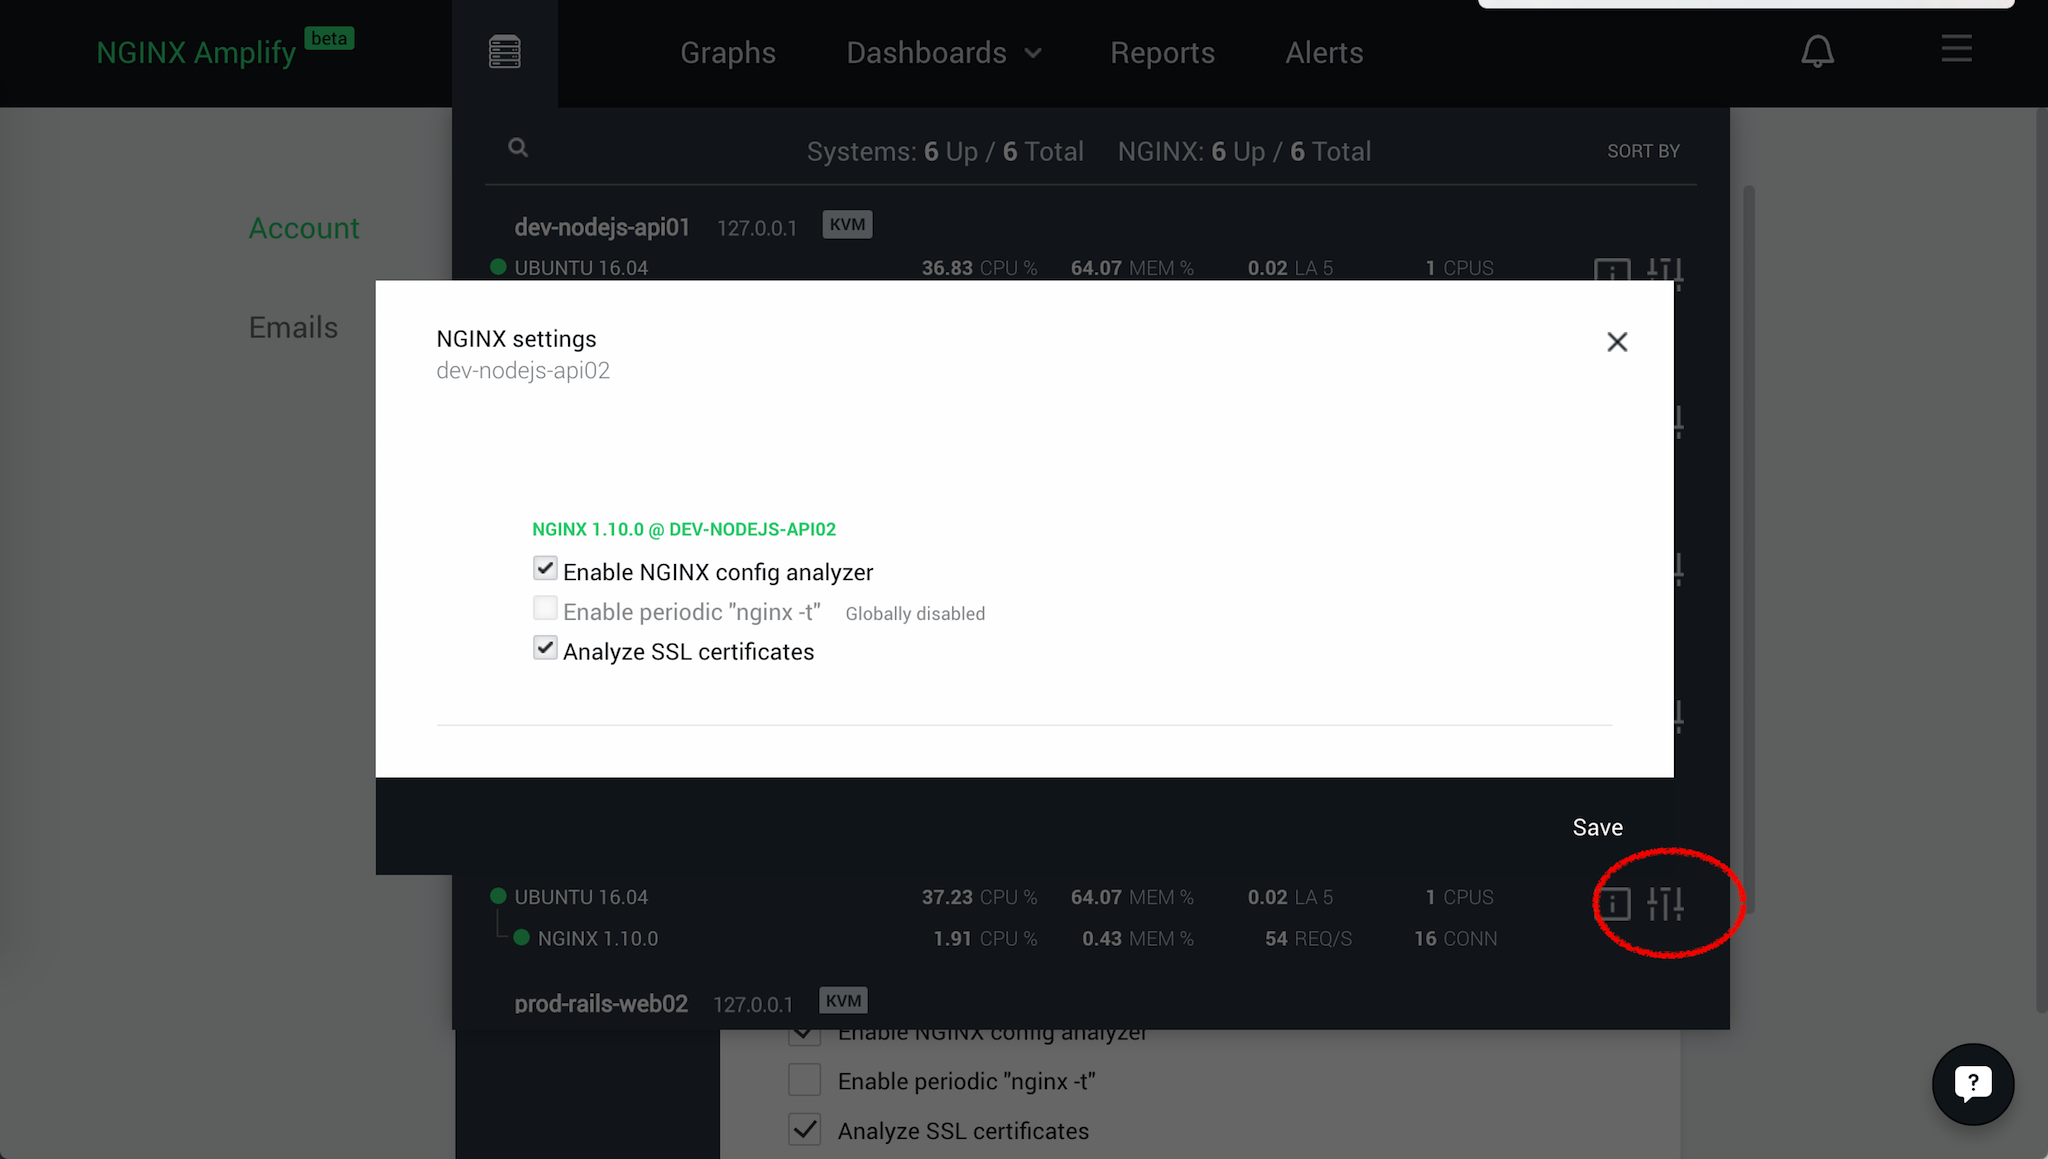 The 'NGINX settings' panel for an individual system controls which types of NGINX configuration analysis are included in NGINX Amplify reporting